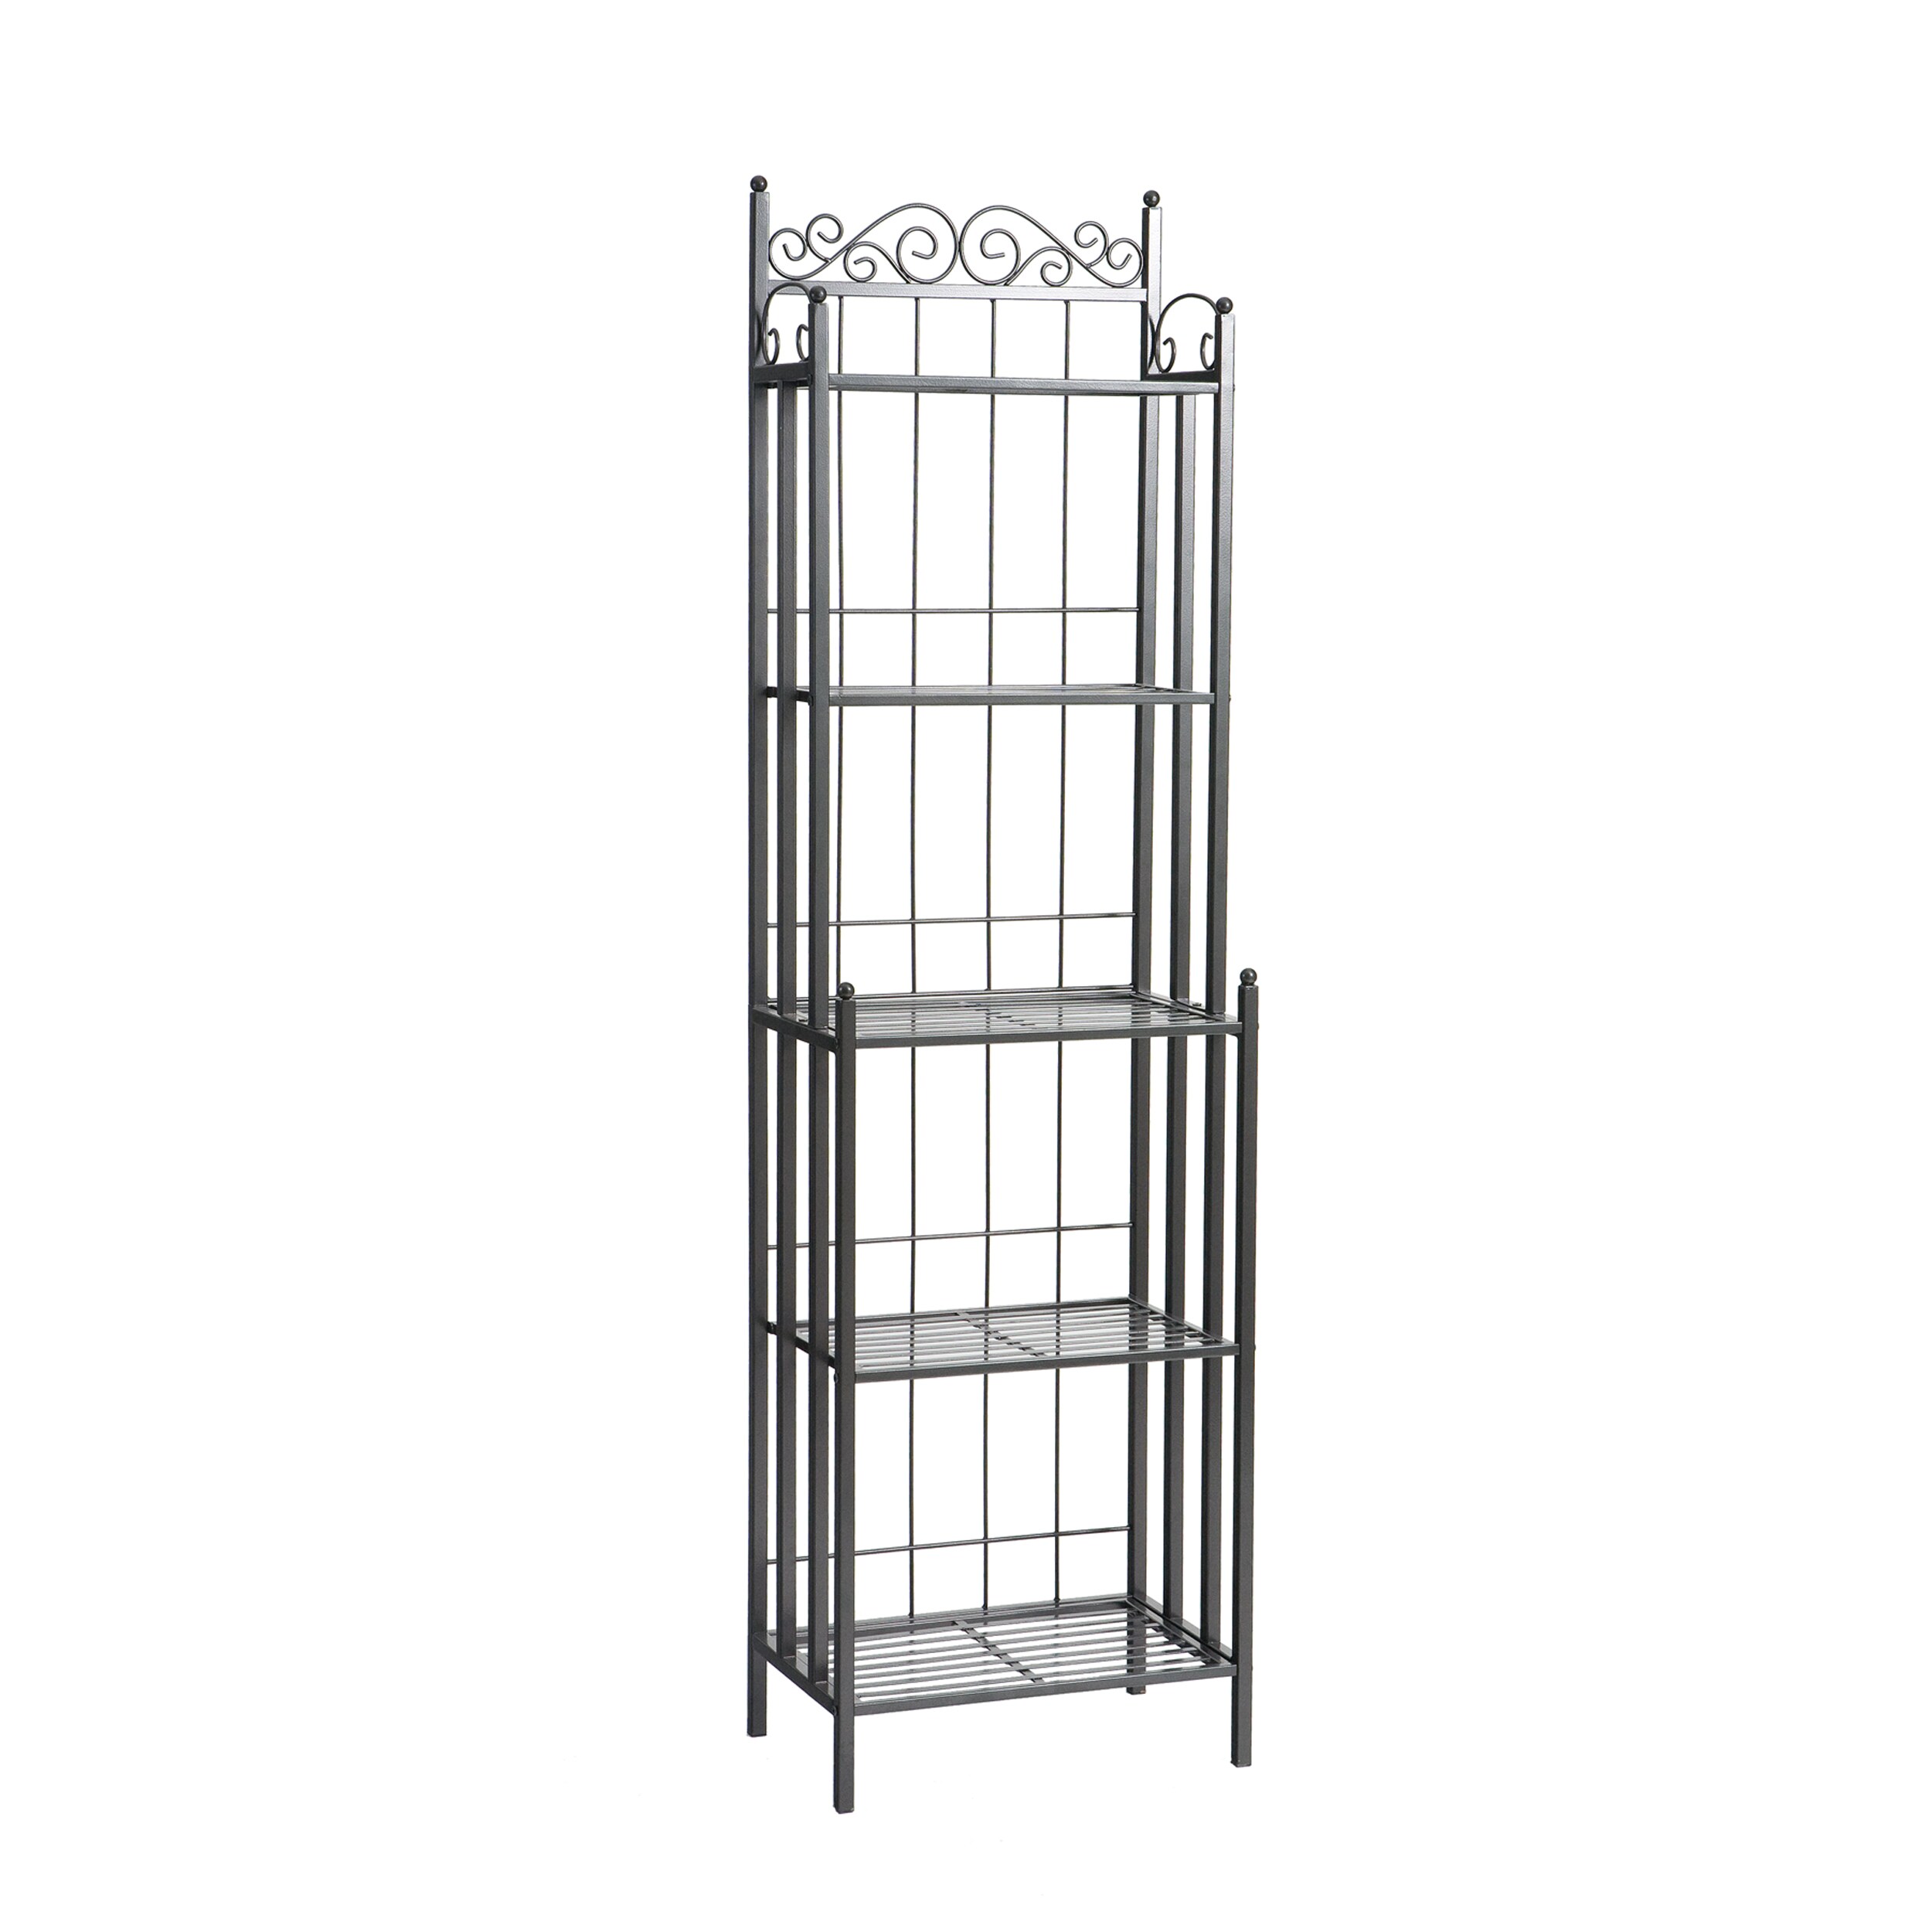 White Bakers Rack Corner Basket Stand w/ Finial on Top 